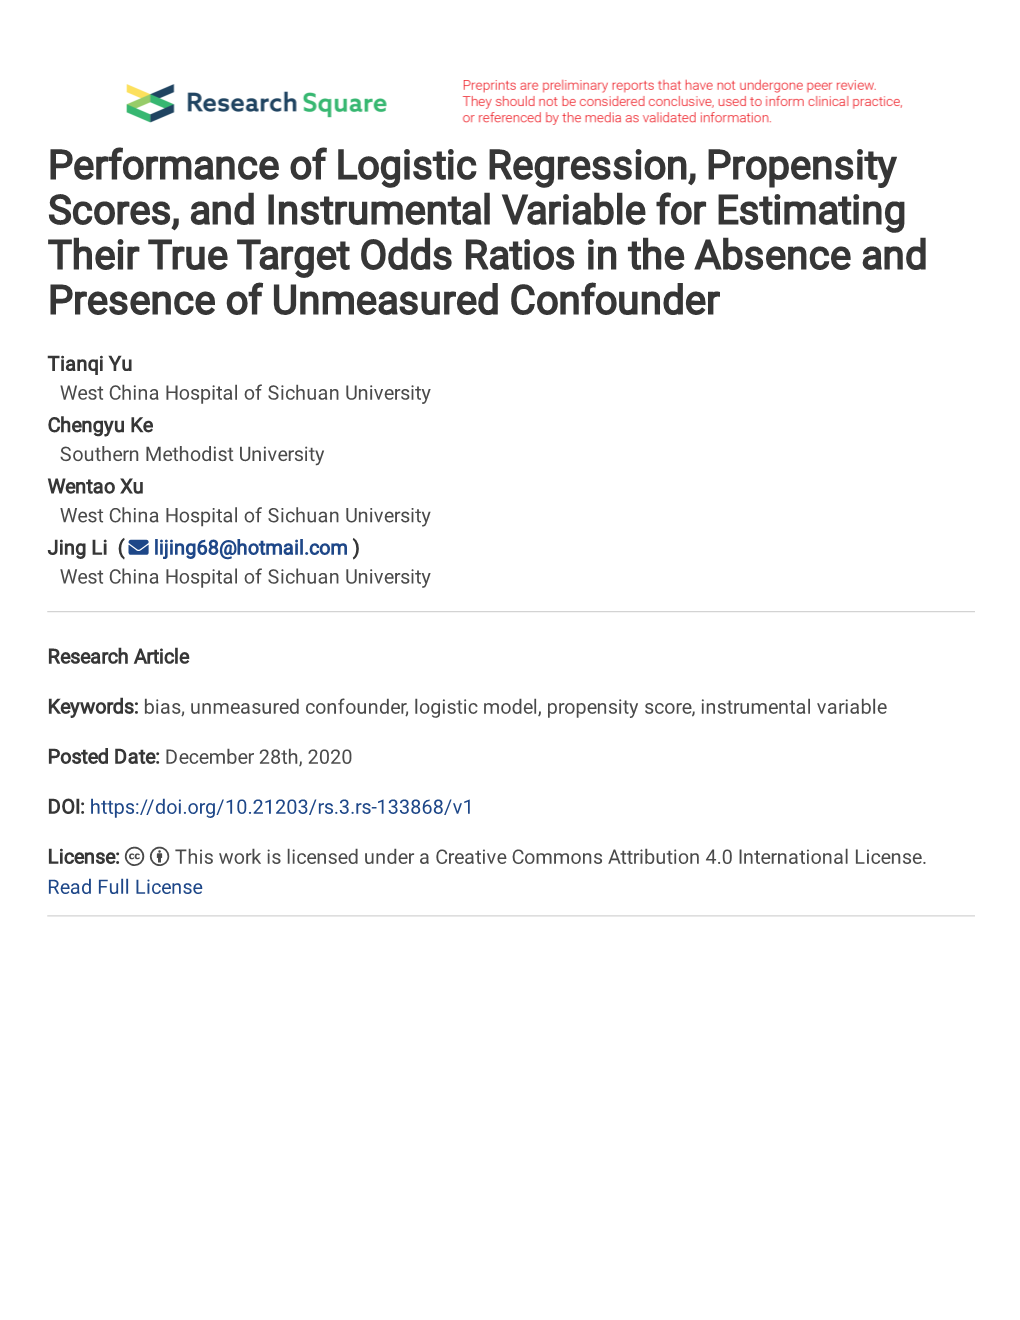 Performance of Logistic Regression, Propensity Scores, and Instrumental Variable for Estimating Their True Target Odds Ratios In